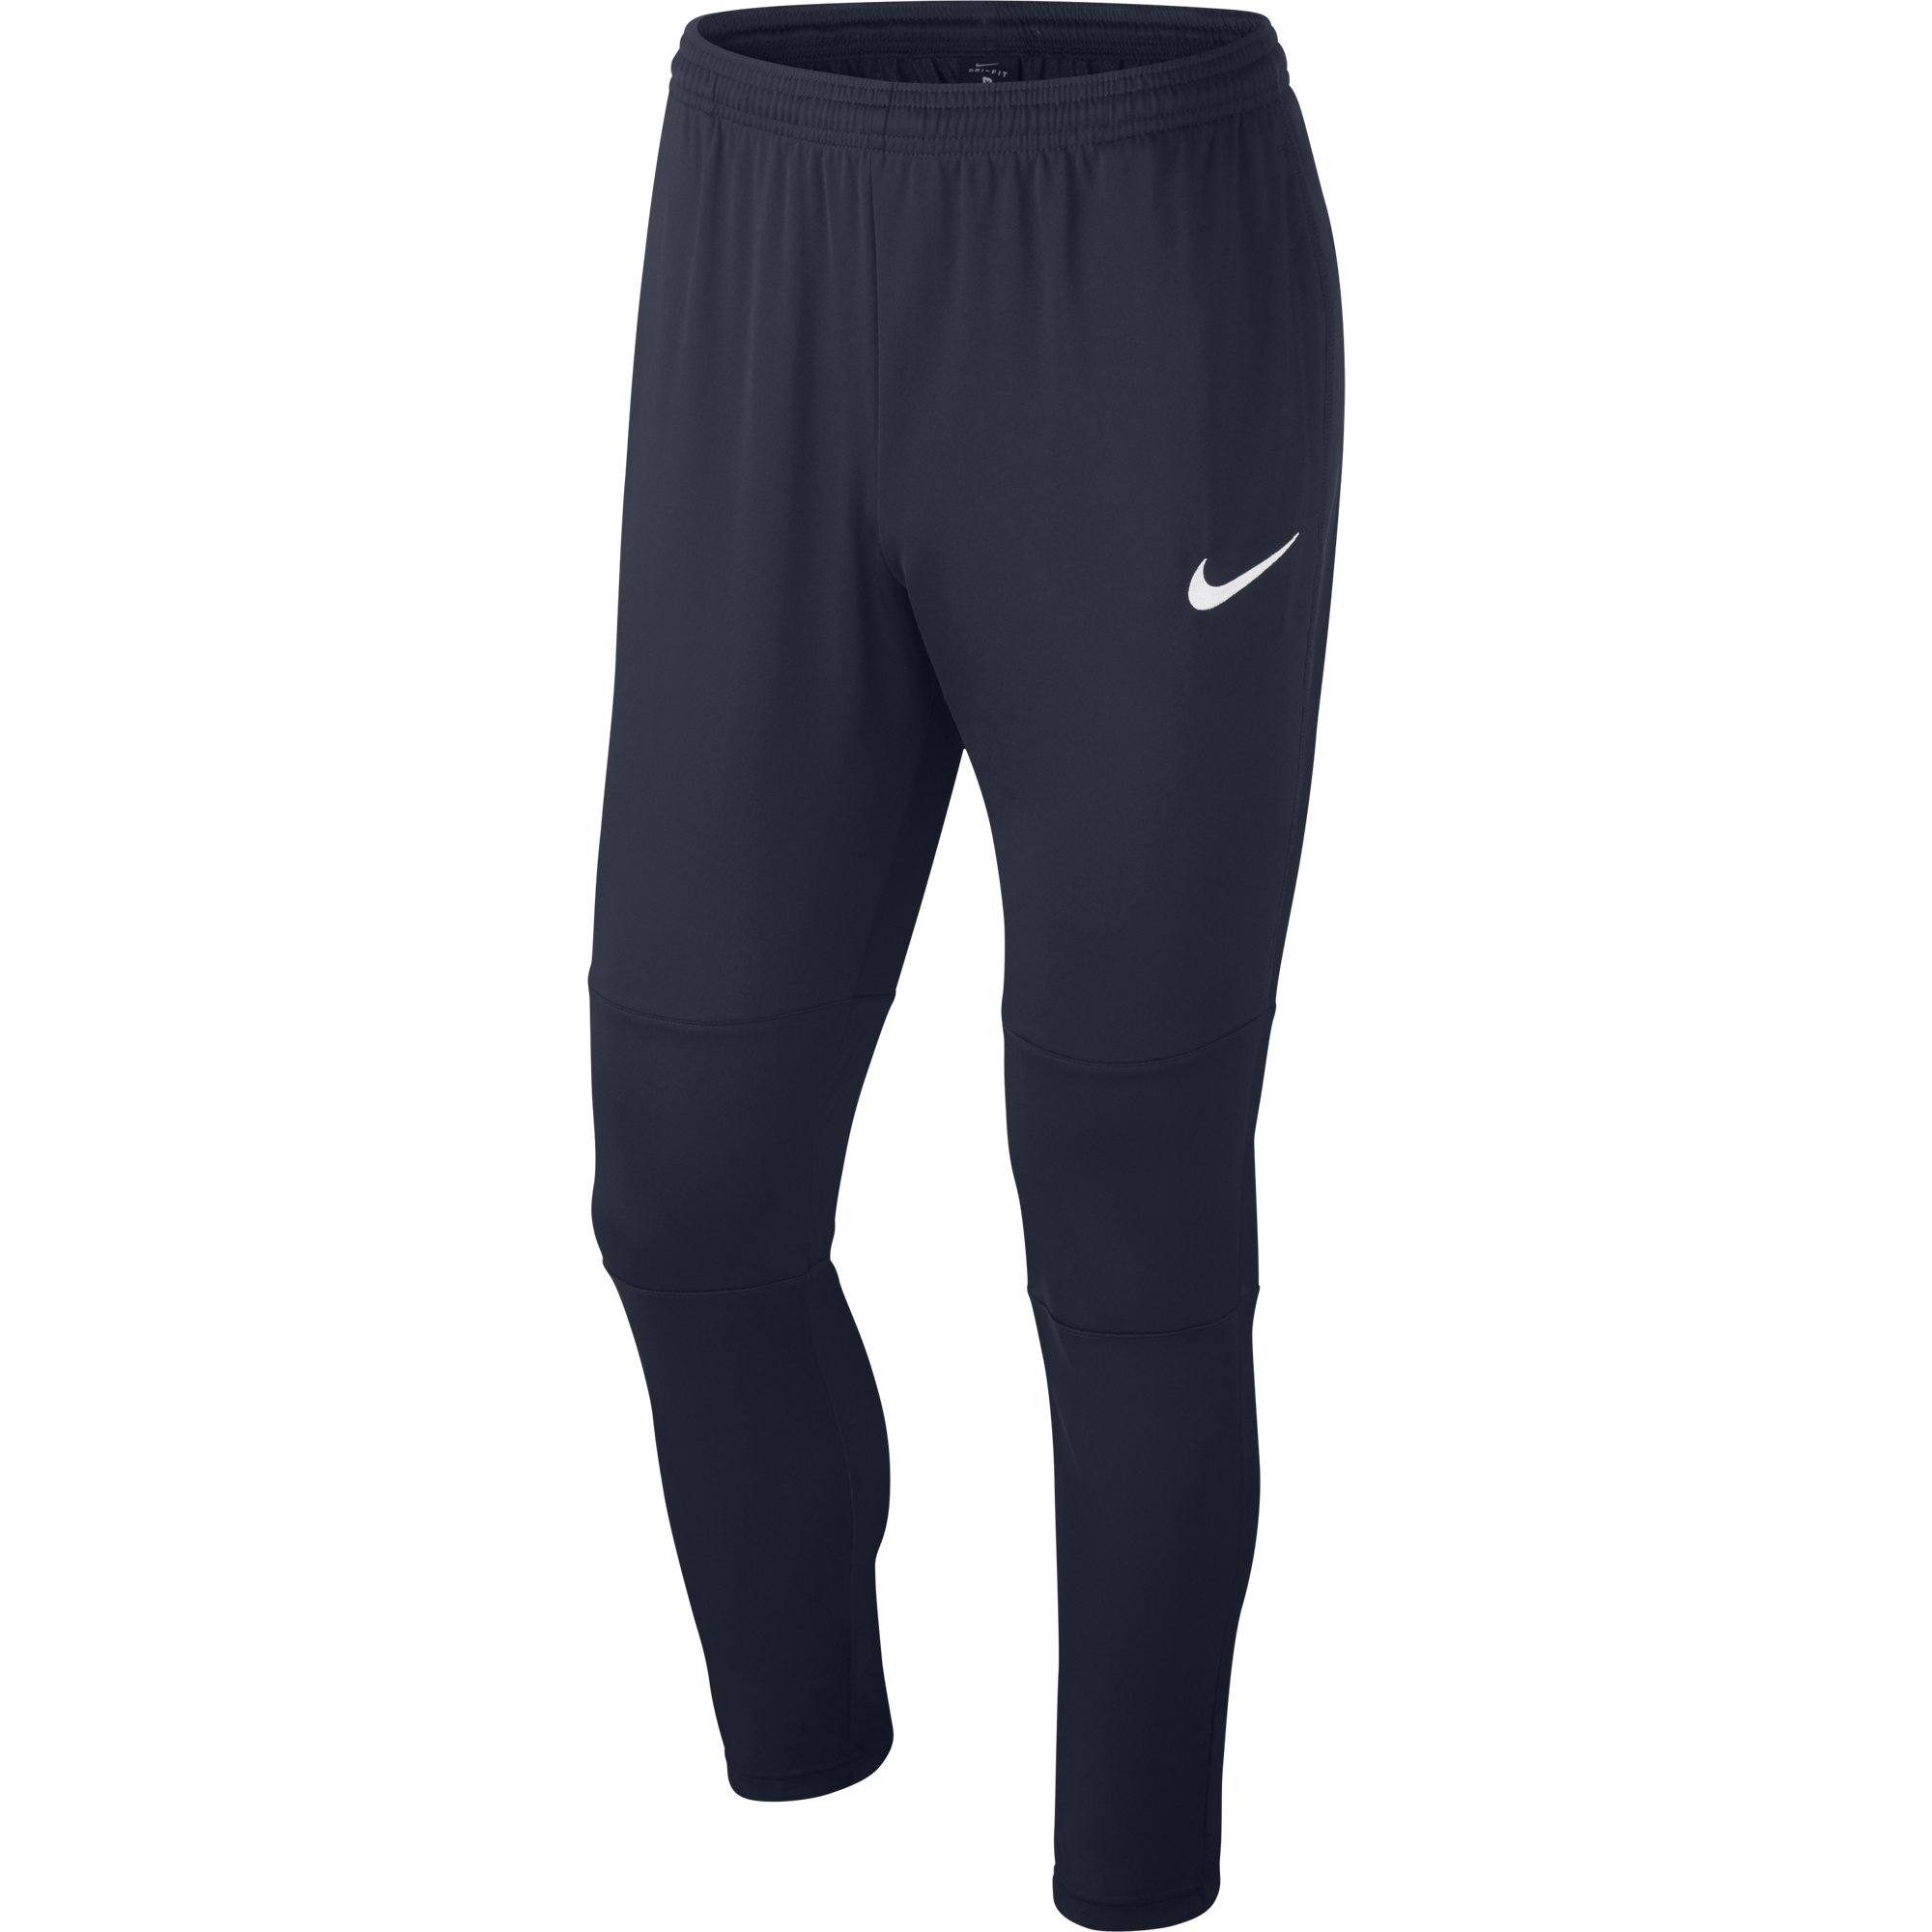 Dont Just Kick it - Nike Park tracksuit, Navy, Youth.